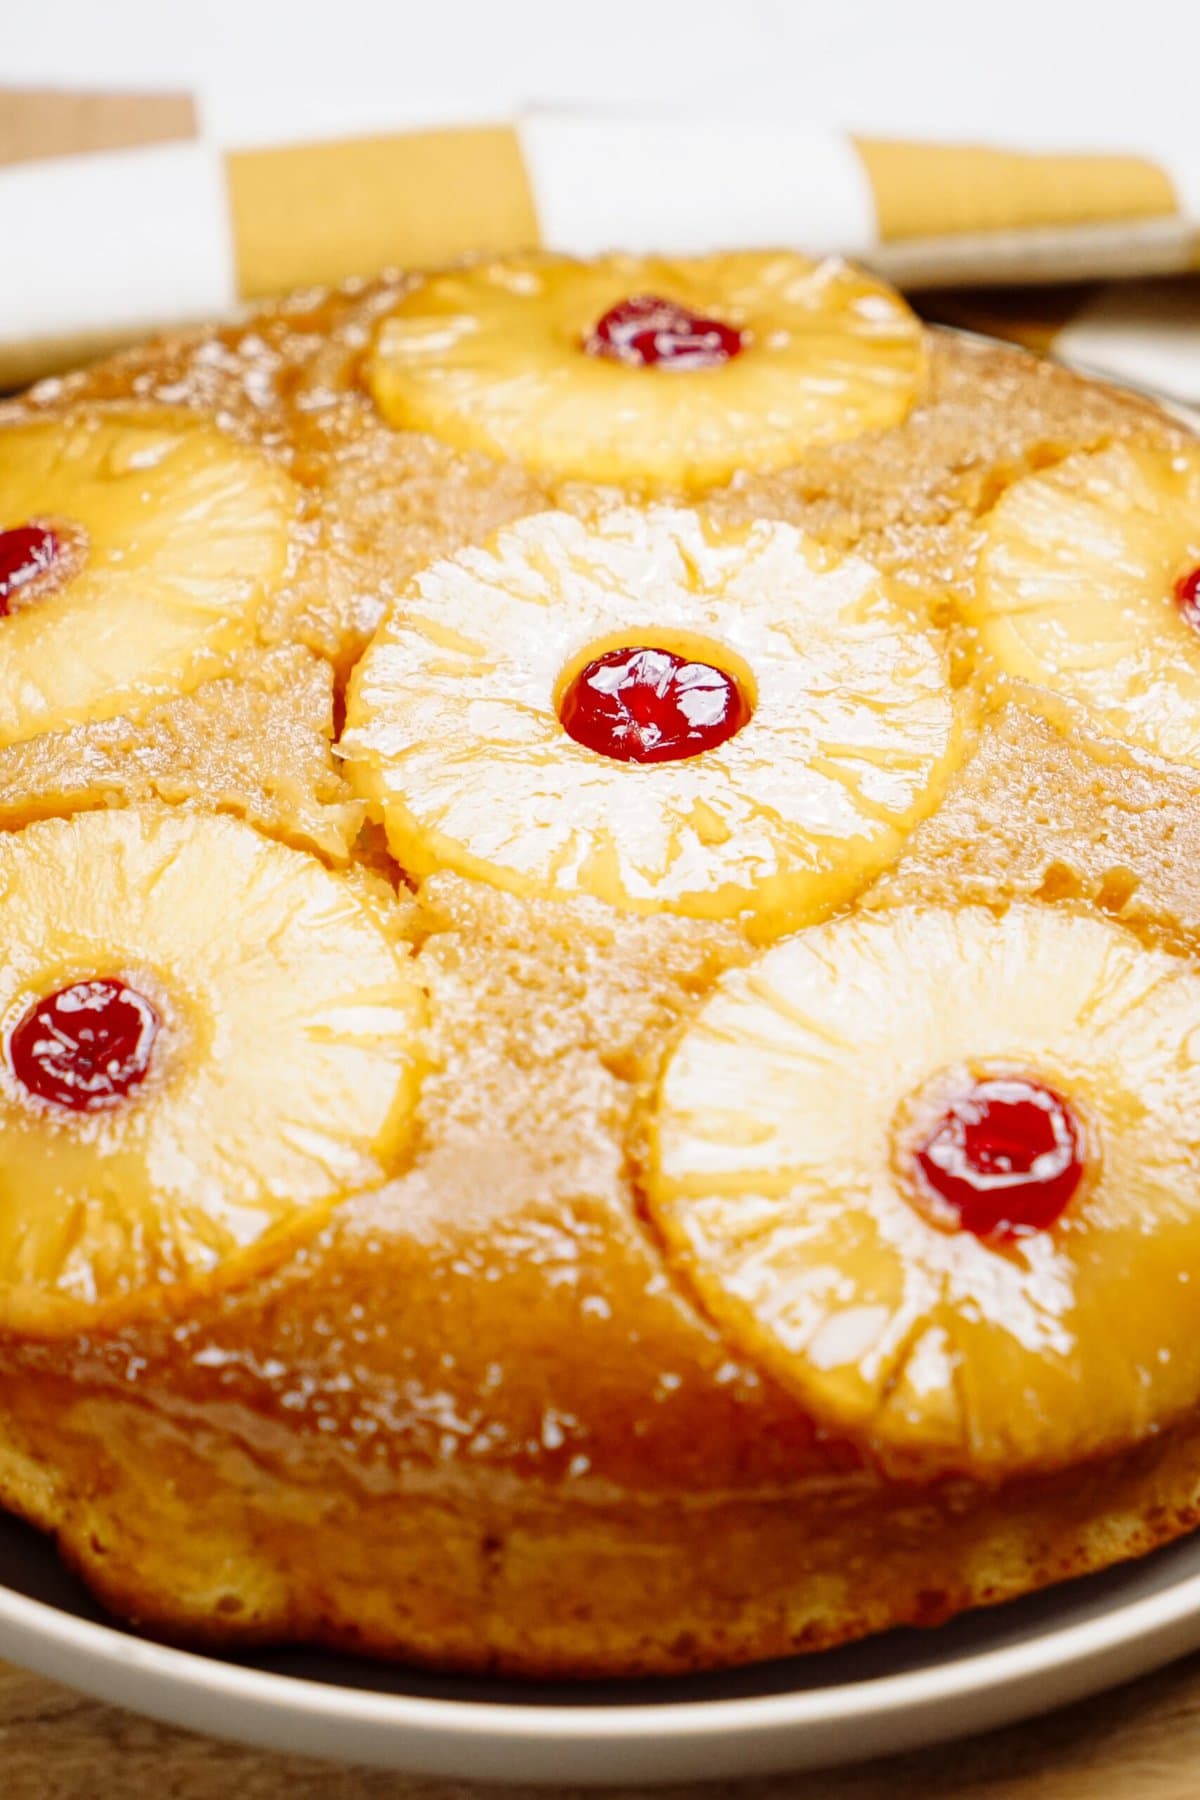 Pineapple upside-down cake with cherries on a plate.